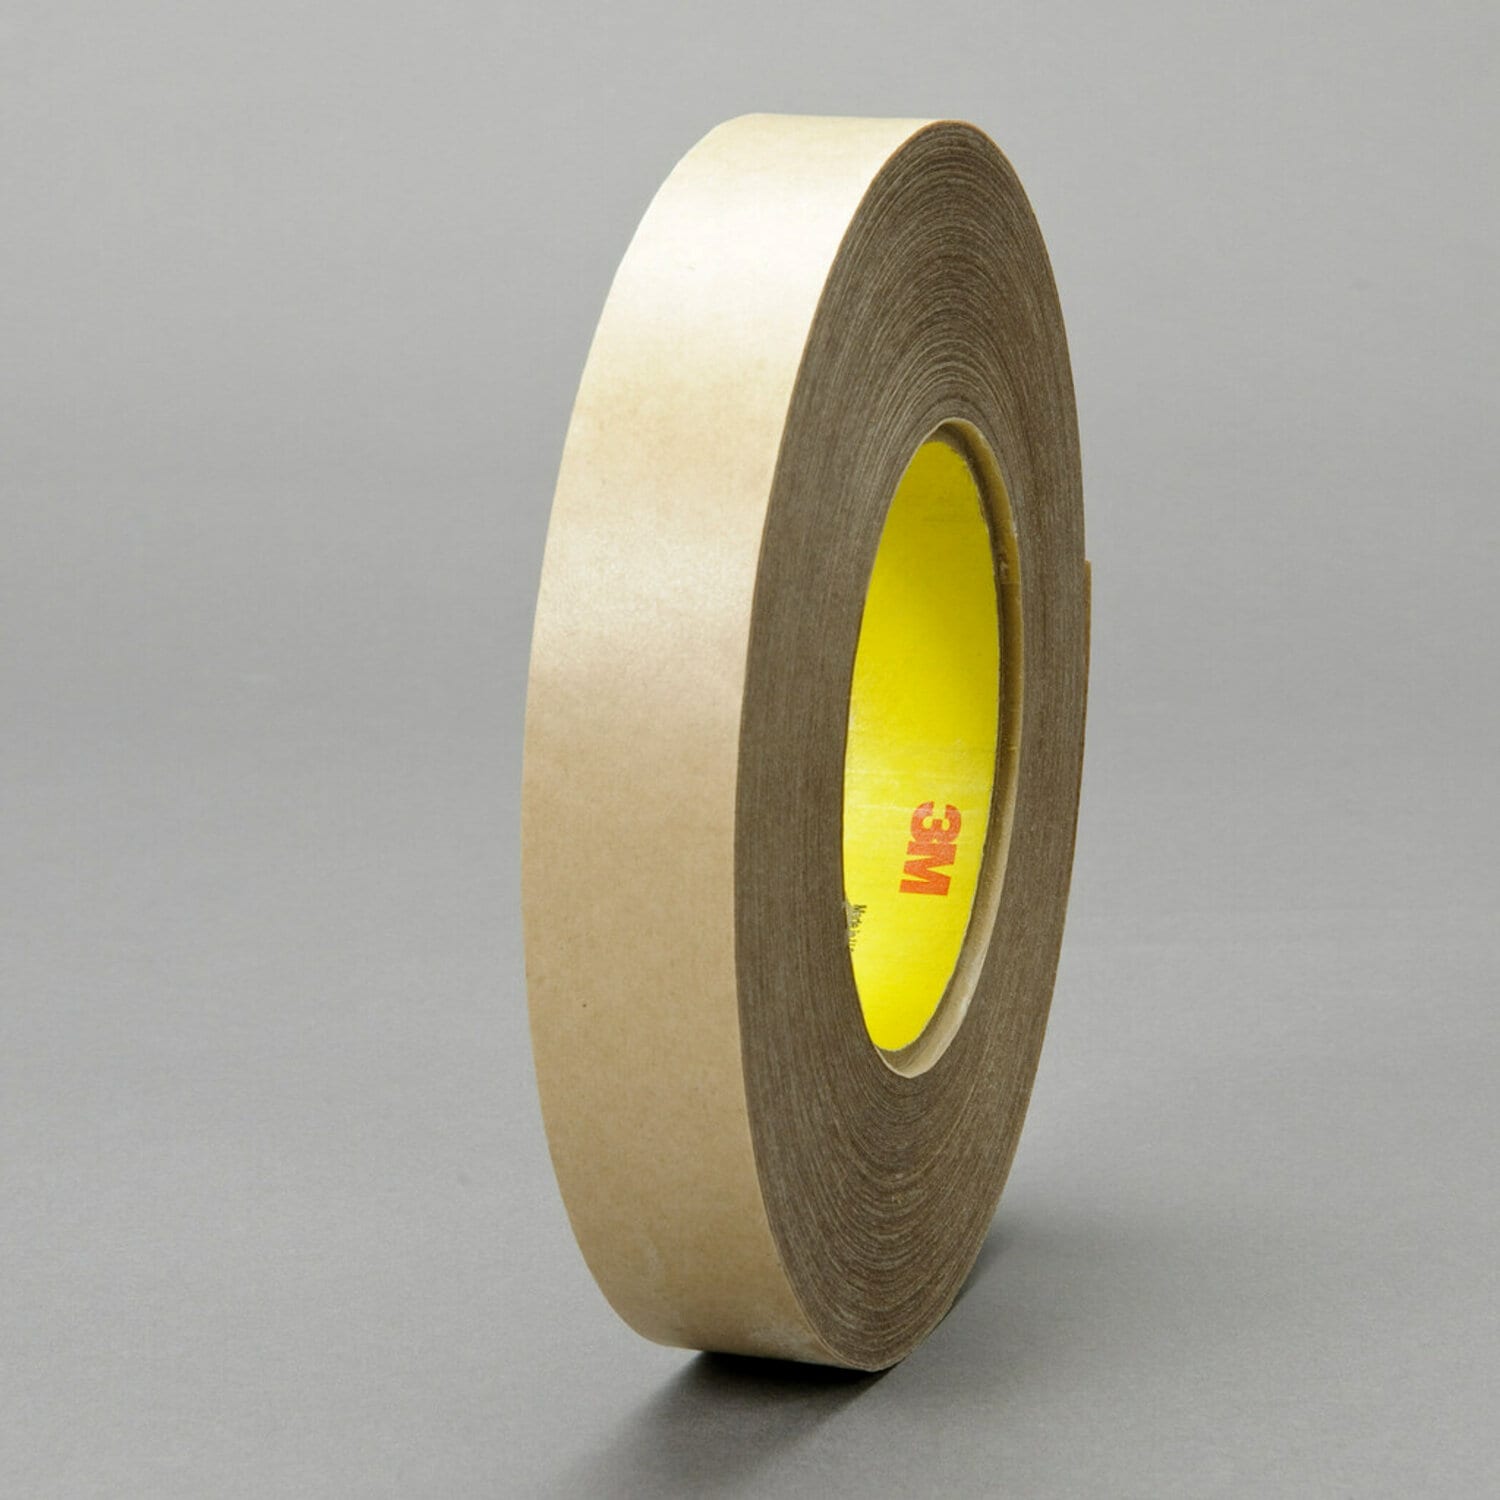 7010373755 - 3M Adhesive Transfer Tape 9485PC, Clear, 3/4 in x 180 yd, 5 mil, 12
rolls per case